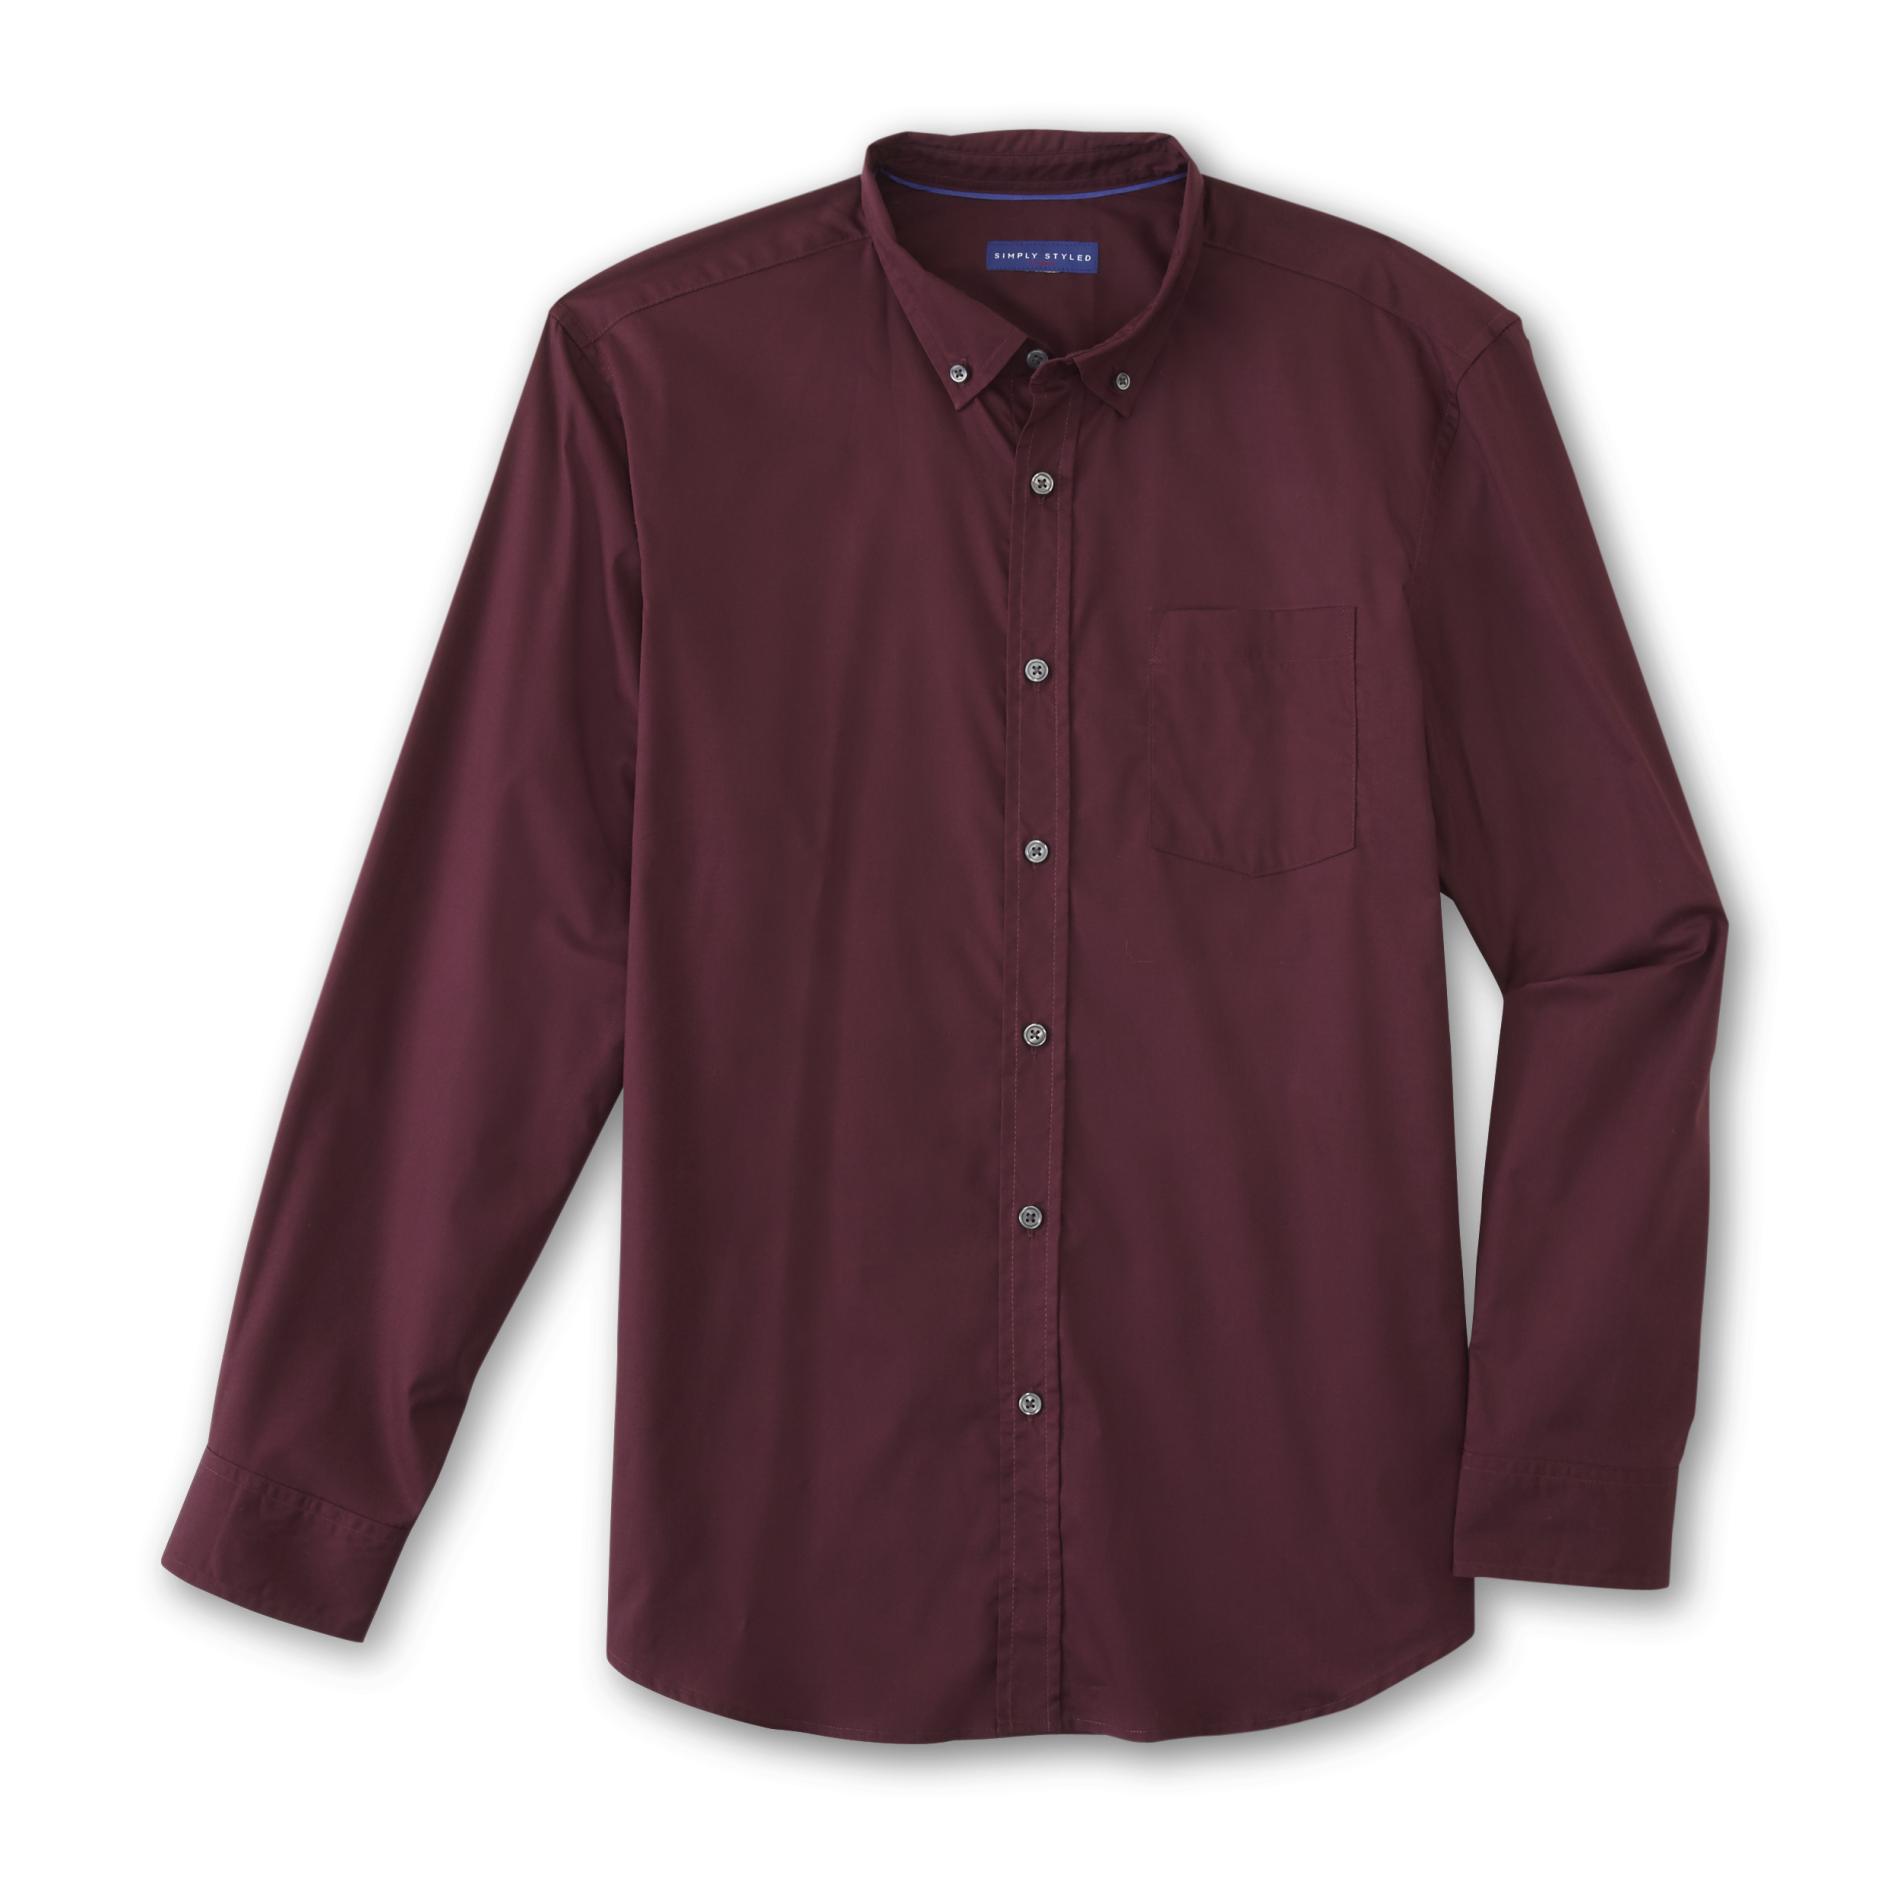 Simply Styled Men's Long-Sleeve Shirt